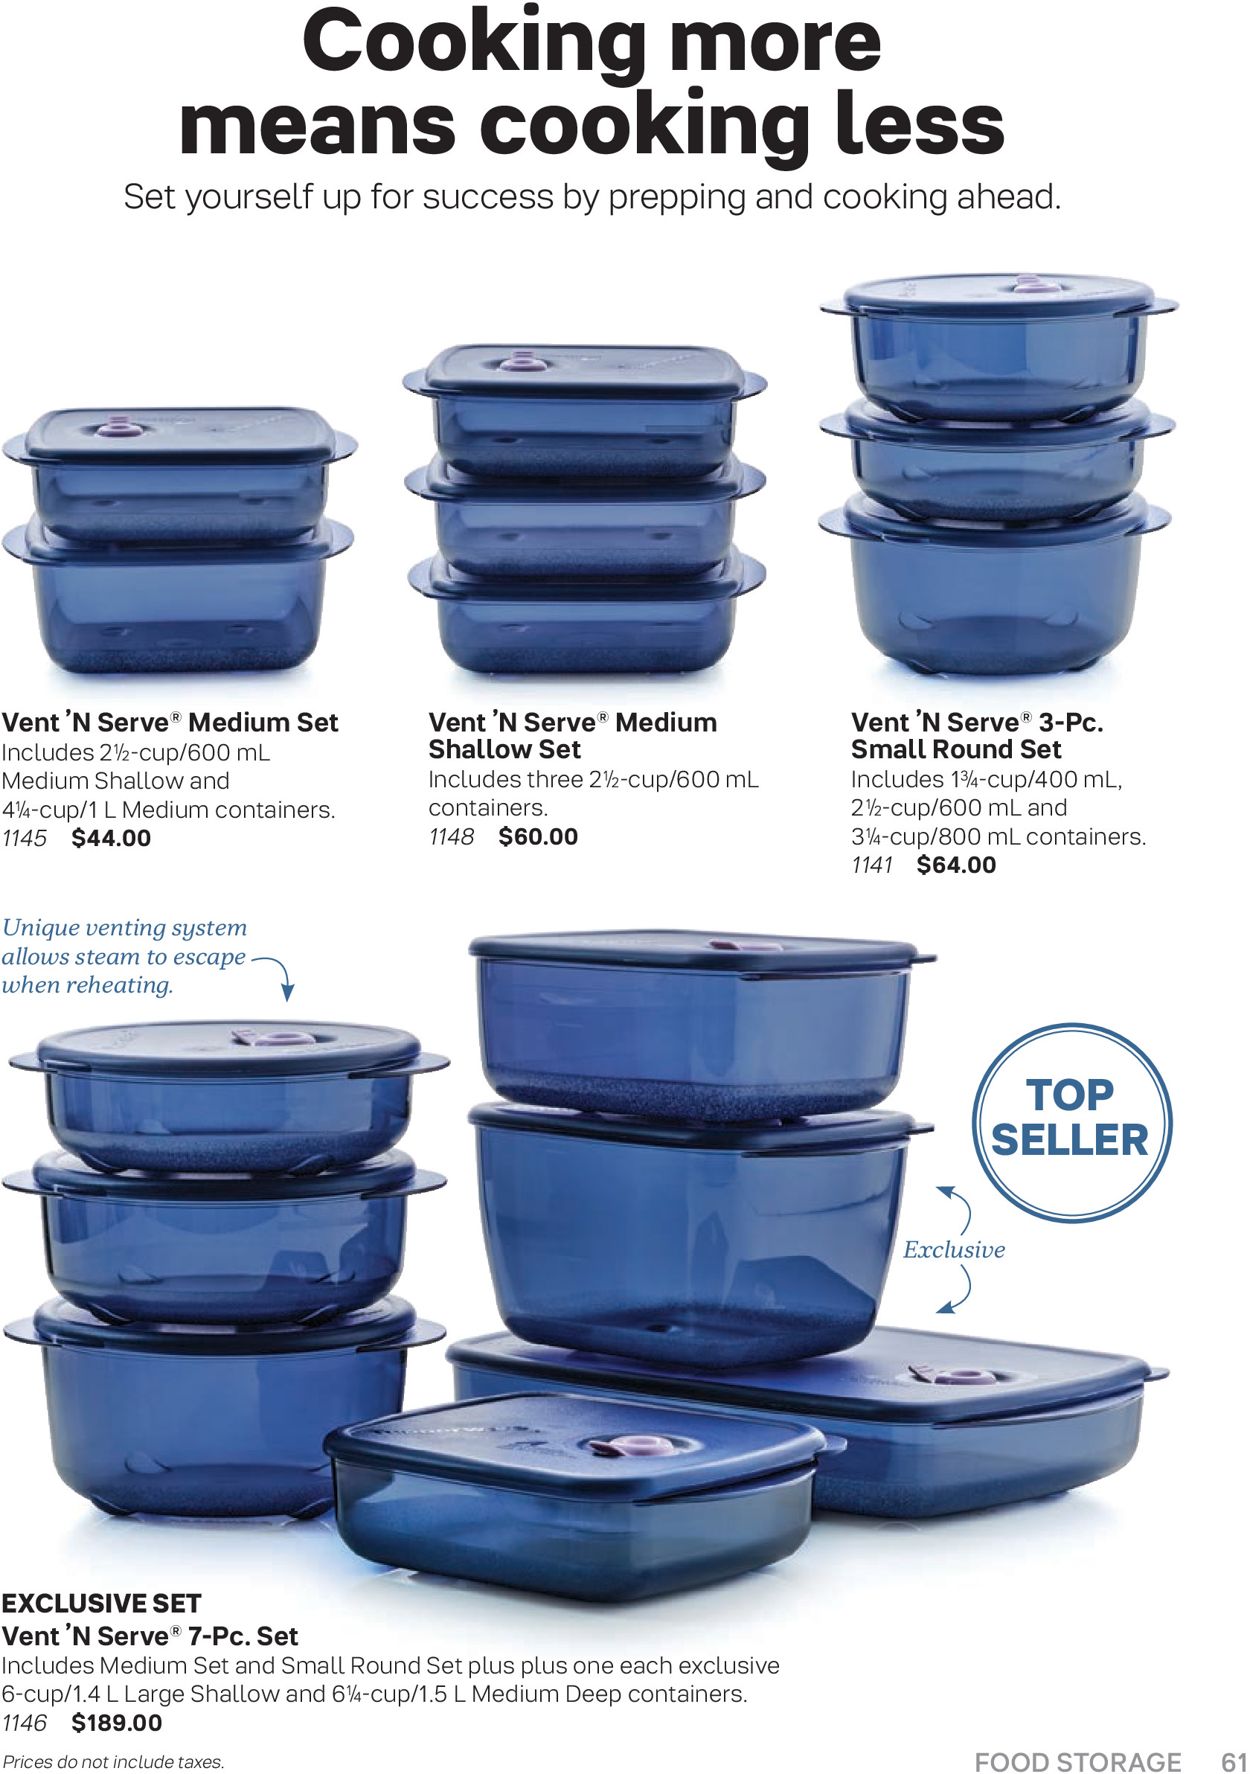 Tupperware Flyer from 01/27/2022